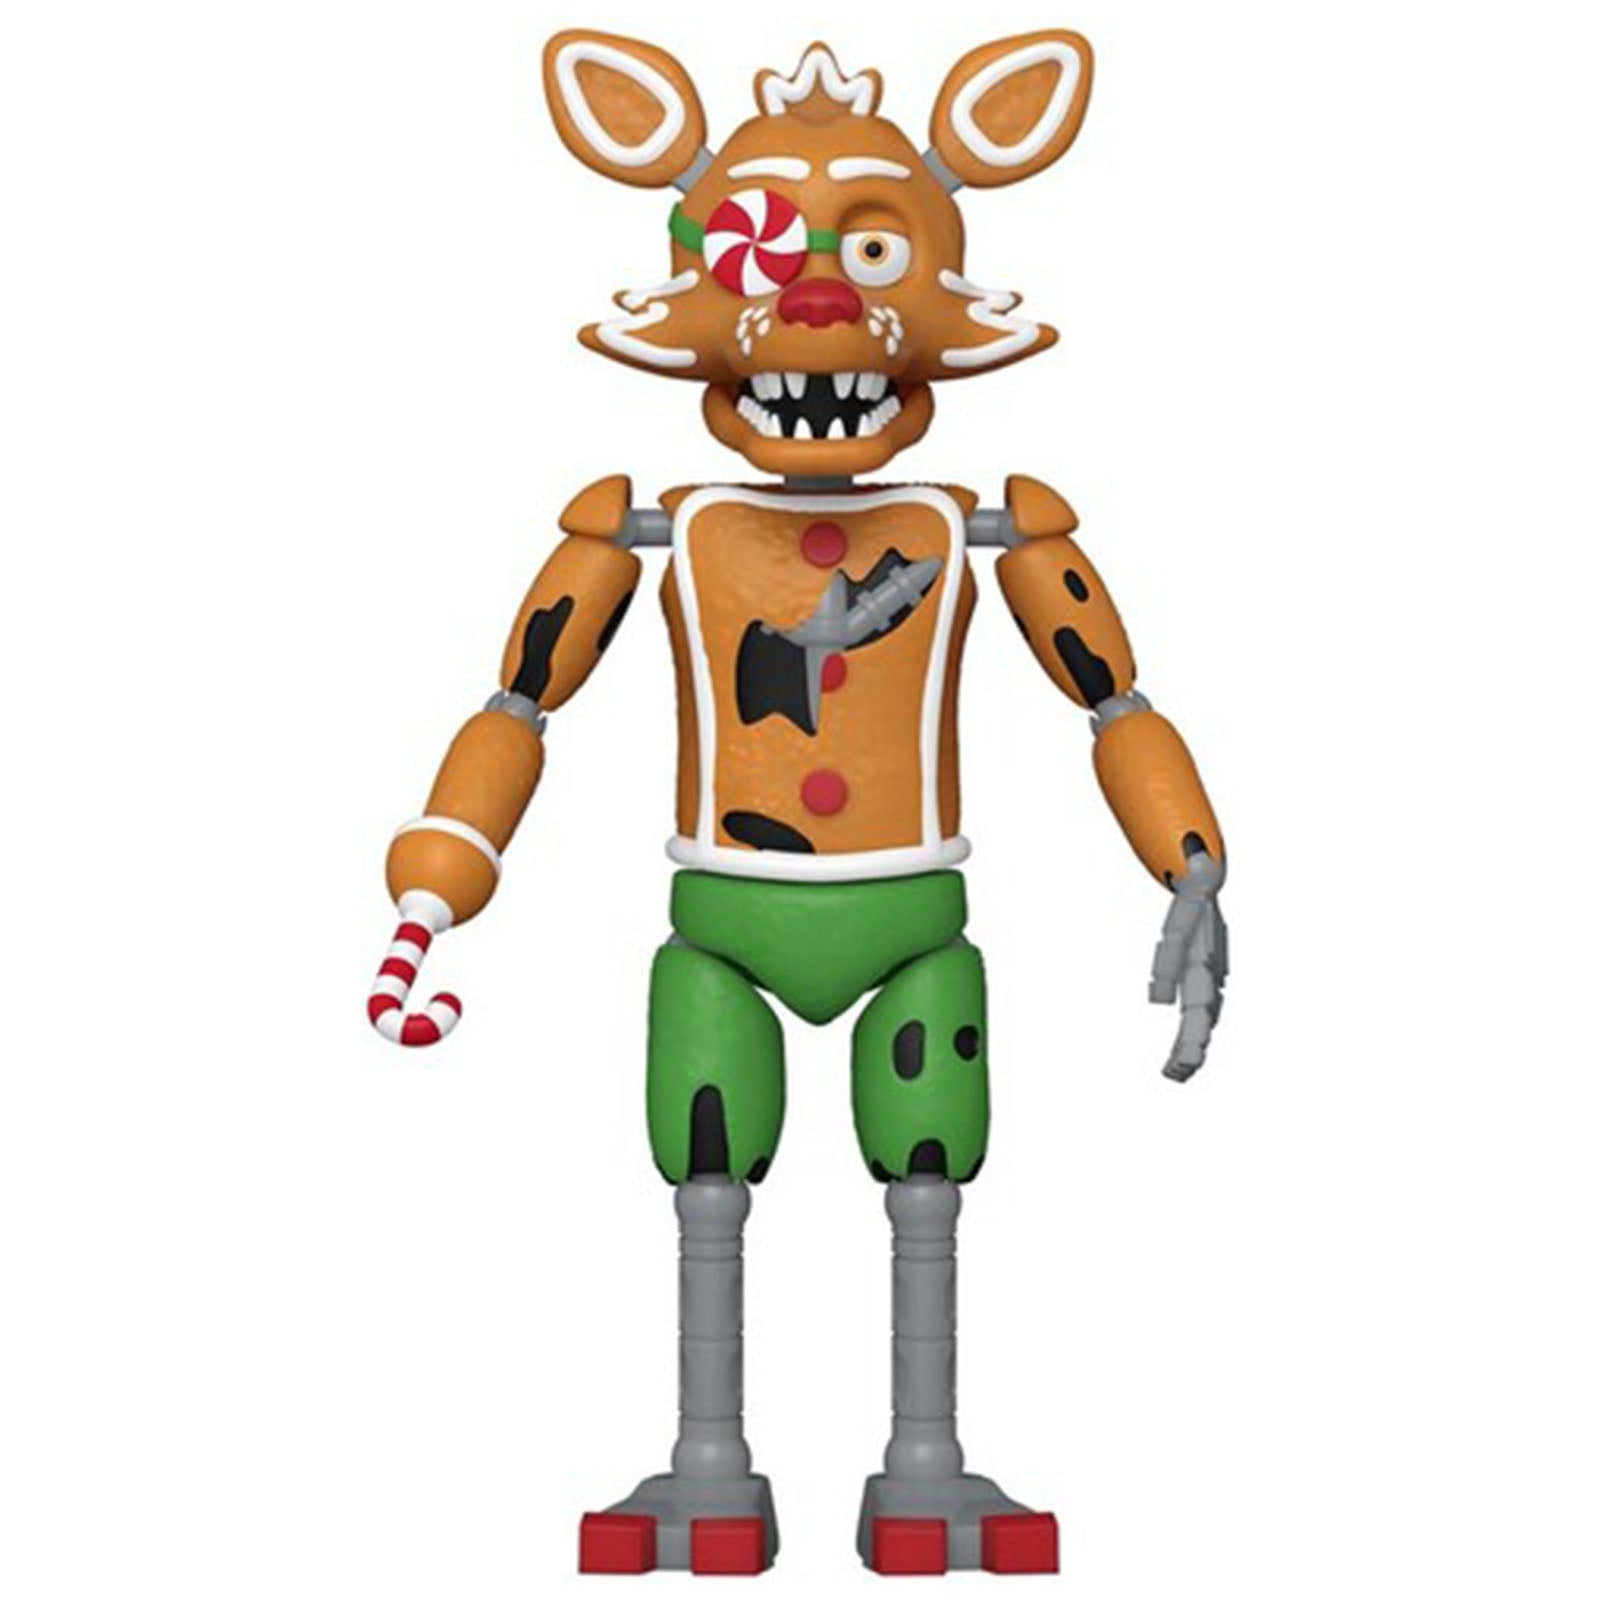 WE ARE GETTING A NEW FNAF CALENDAR, found this on the funko website #